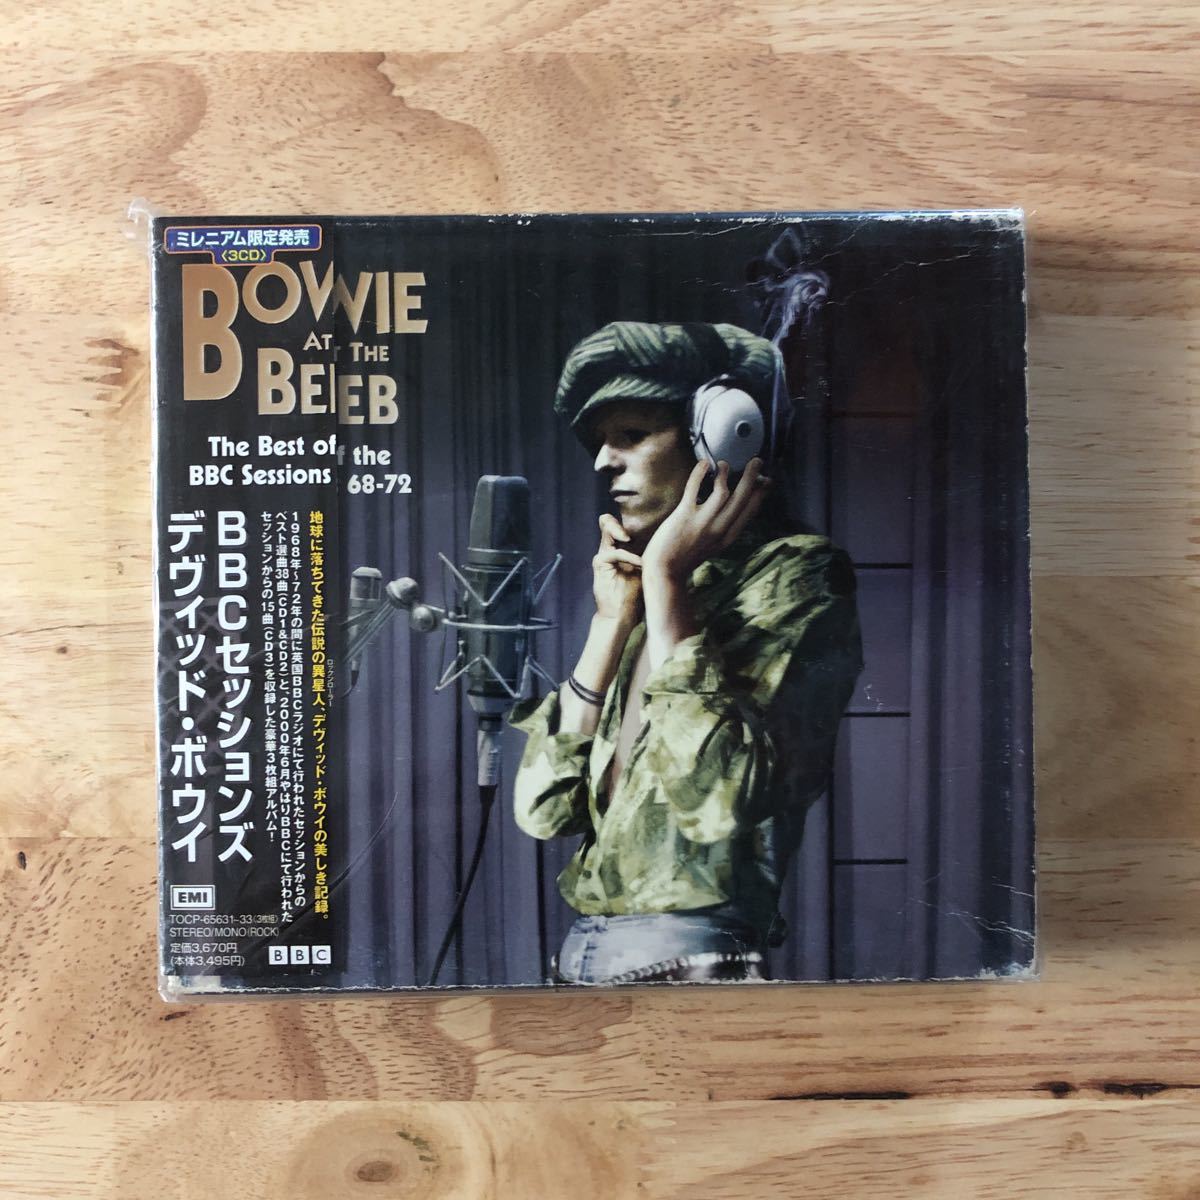 DAVID BOWIE デヴィッド・ボウイ/BOWIE AT THE BEEB THE BEST OF THE BBC SESSIONS 68-72[国内盤:帯:詳細な解説付き:3CD:TOCP-65631/33]_画像1